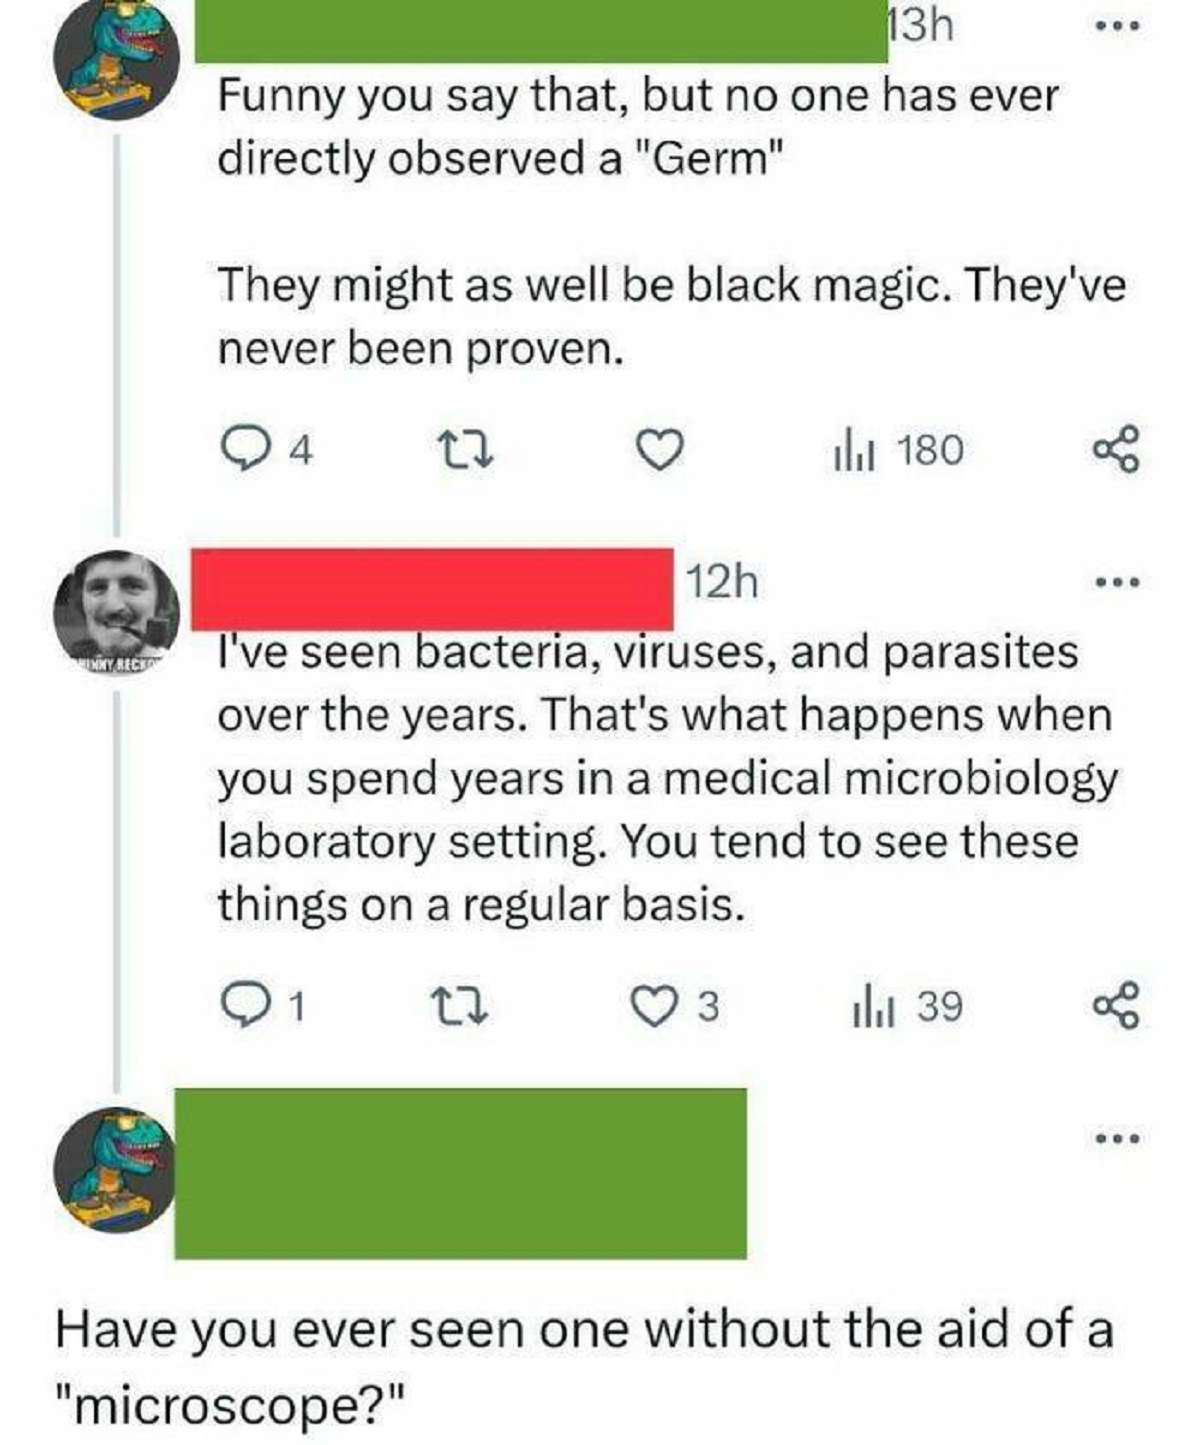 screenshot - Inny Reck 13h Funny you say that, but no one has ever directly observed a "Germ" They might as well be black magic. They've never been proven. Q4 27 tl 180 12h I've seen bacteria, viruses, and parasites over the years. That's what happens whe